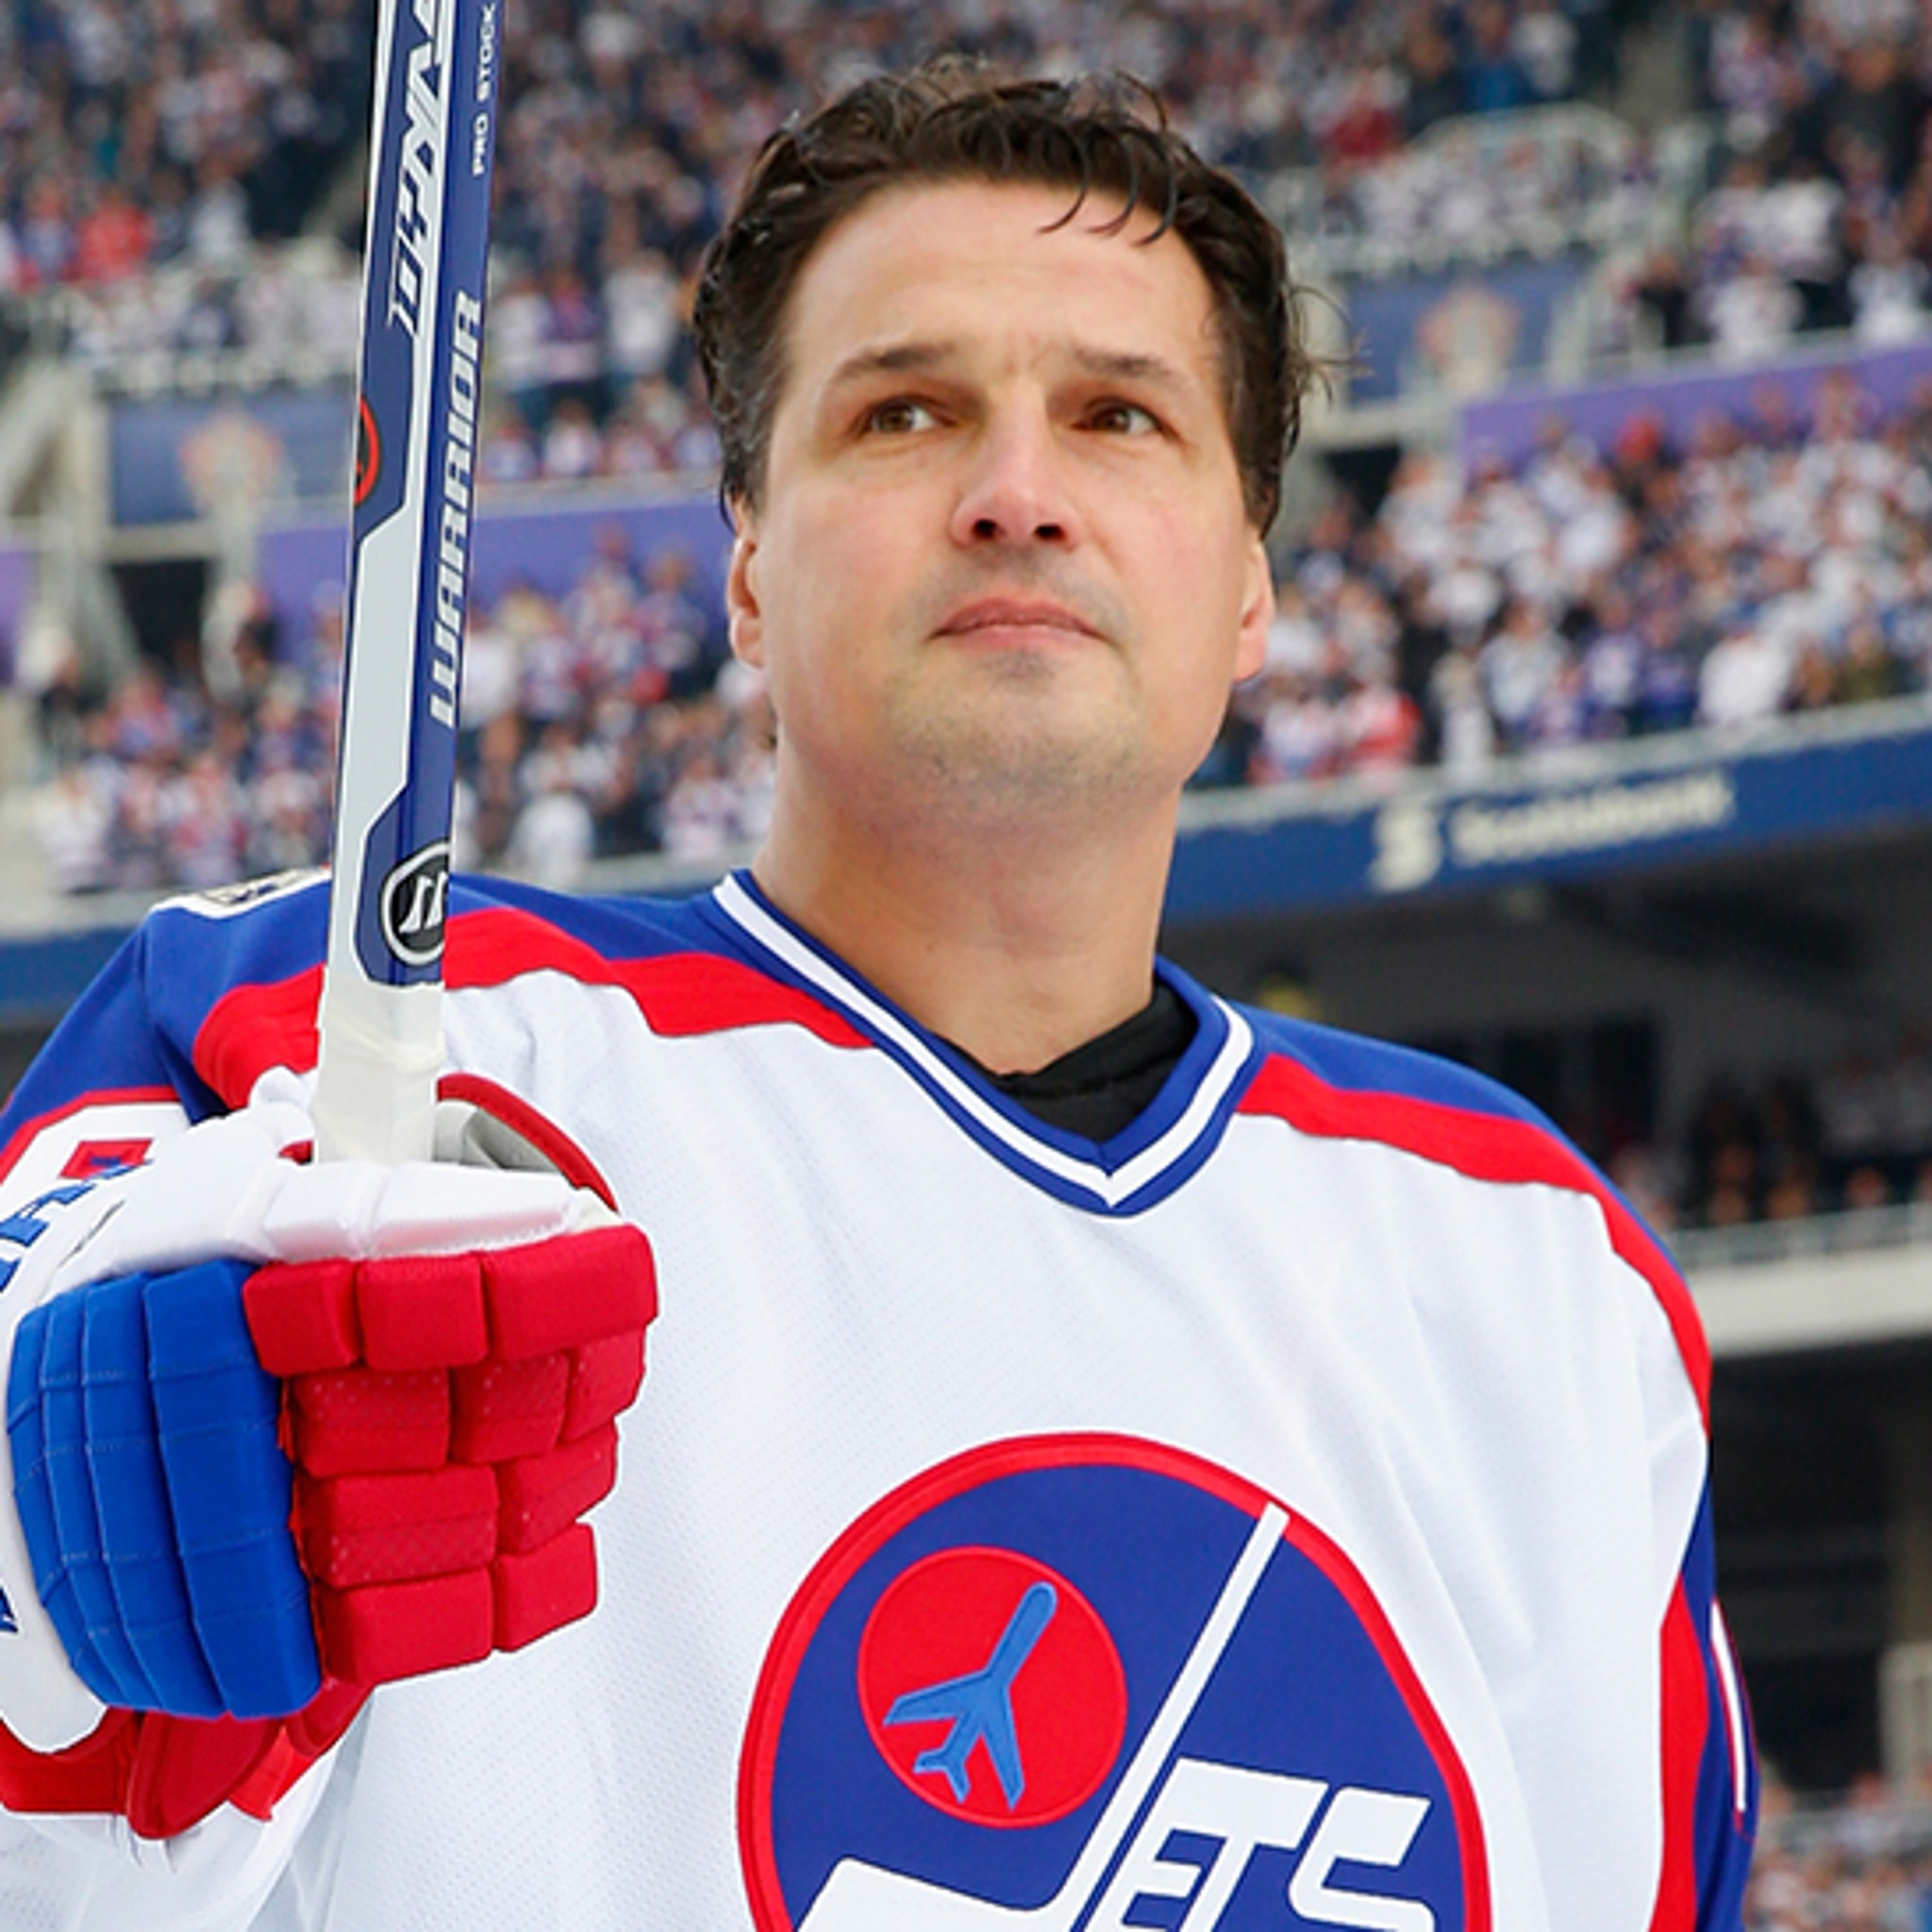 Ex-NHL Star Eddie Olczyk Diagnosed with Colon Cancer, 'I Will Beat This